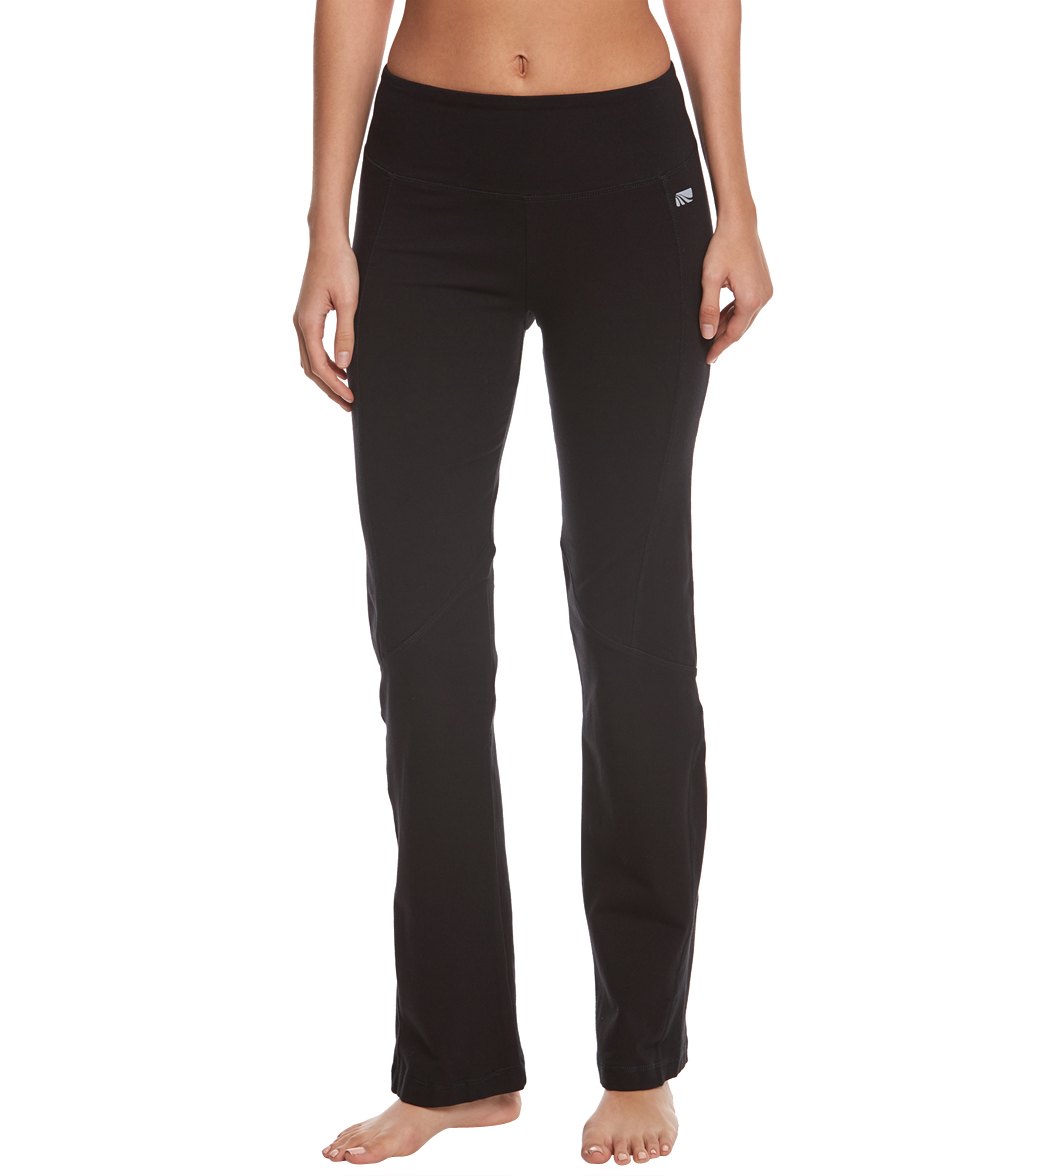 Buy Stelle Women's Bootcut Yoga Pants with Pockets Tummy Control